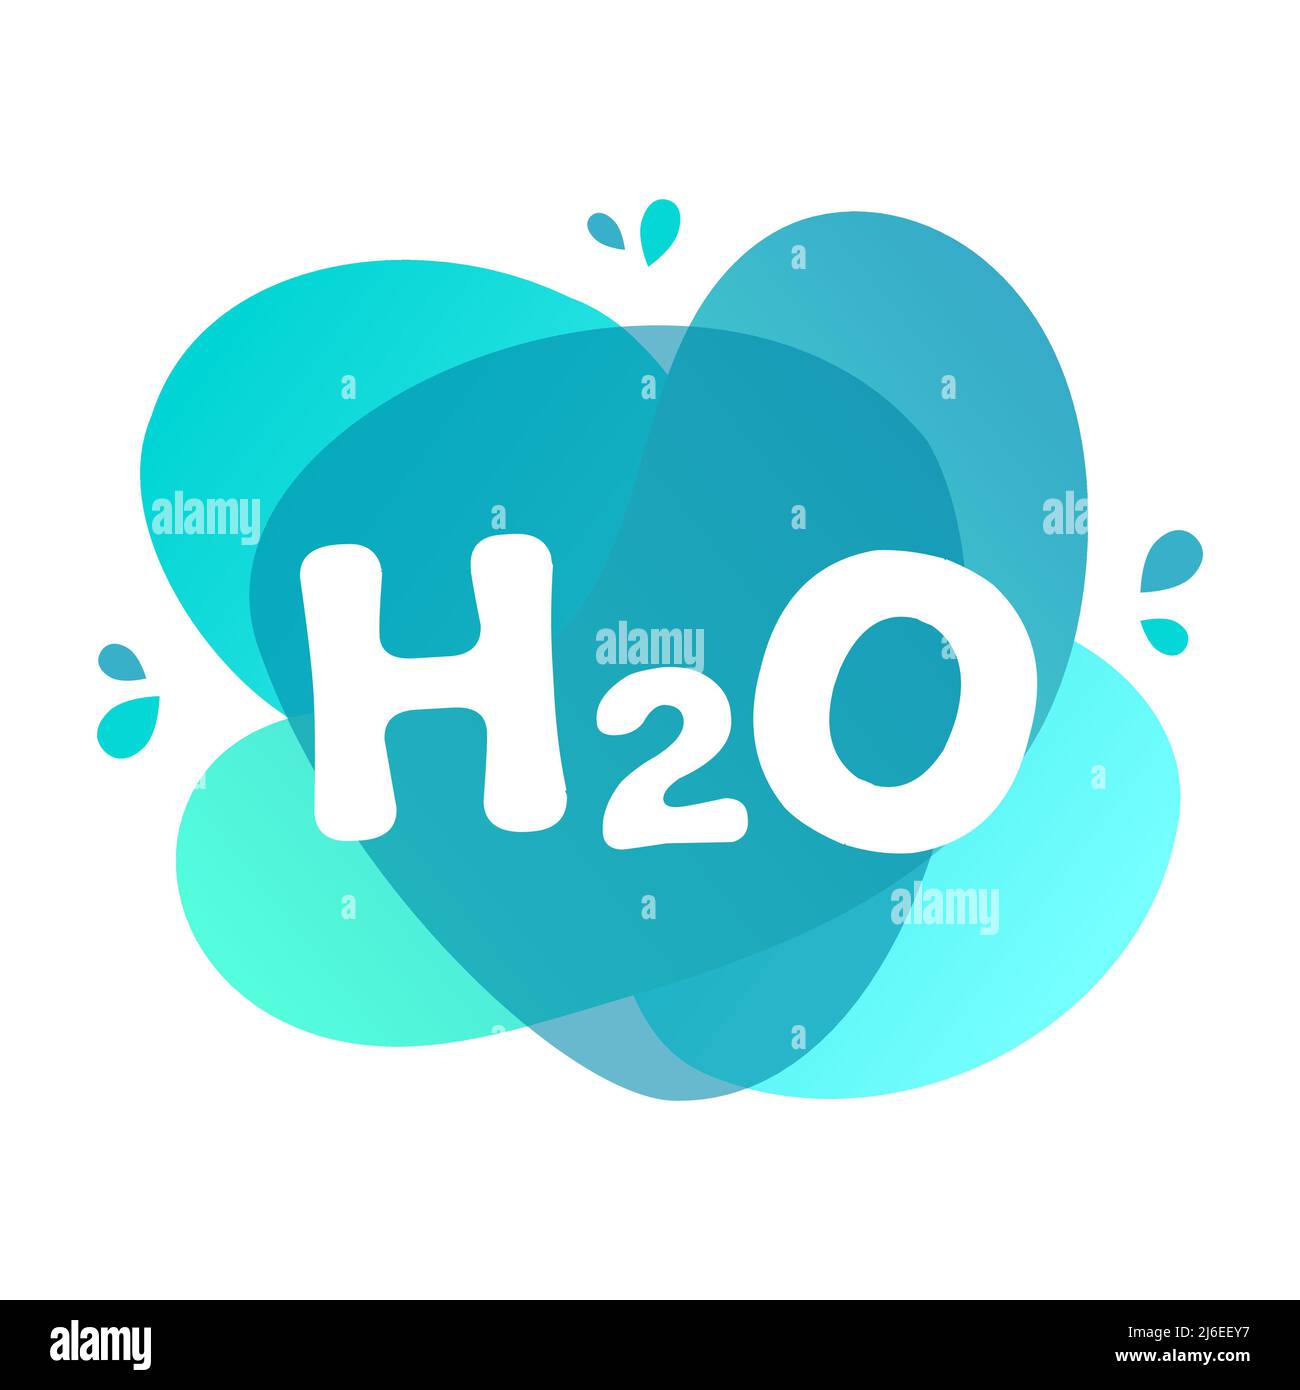 Water symbol on blue splatter background. H2O sign on liquid shapes. Trendy water icon. Nature resources preservation. Clean fresh drinking water. Stock Vector